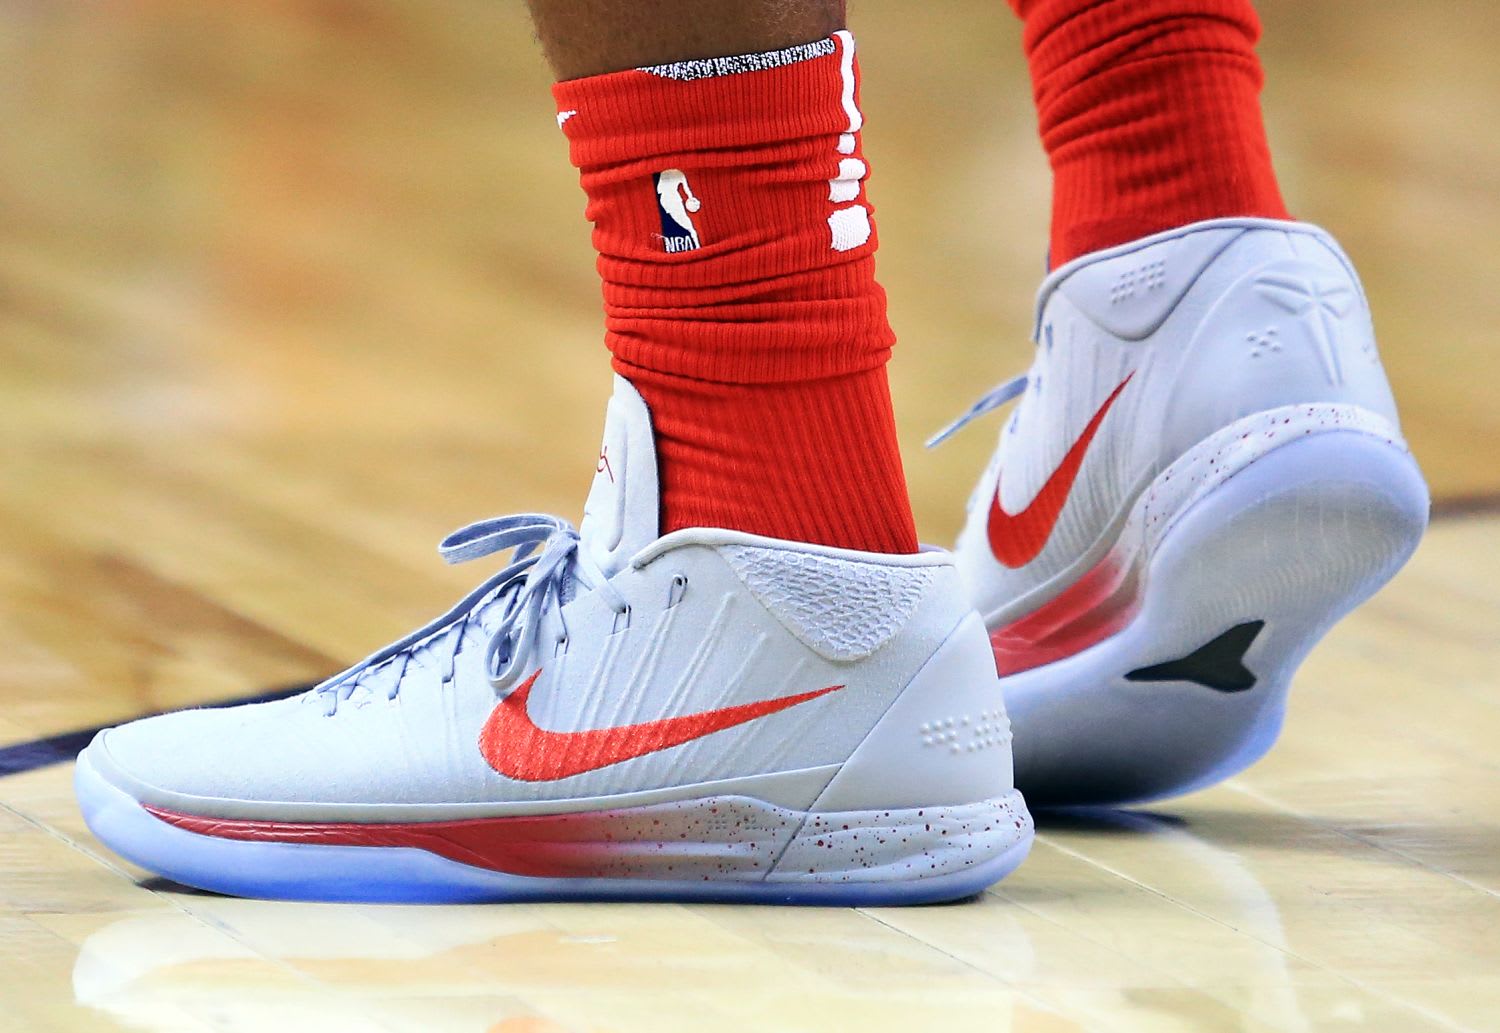 Which player had the best sneakers of Week 24 in the NBA? - ESPN